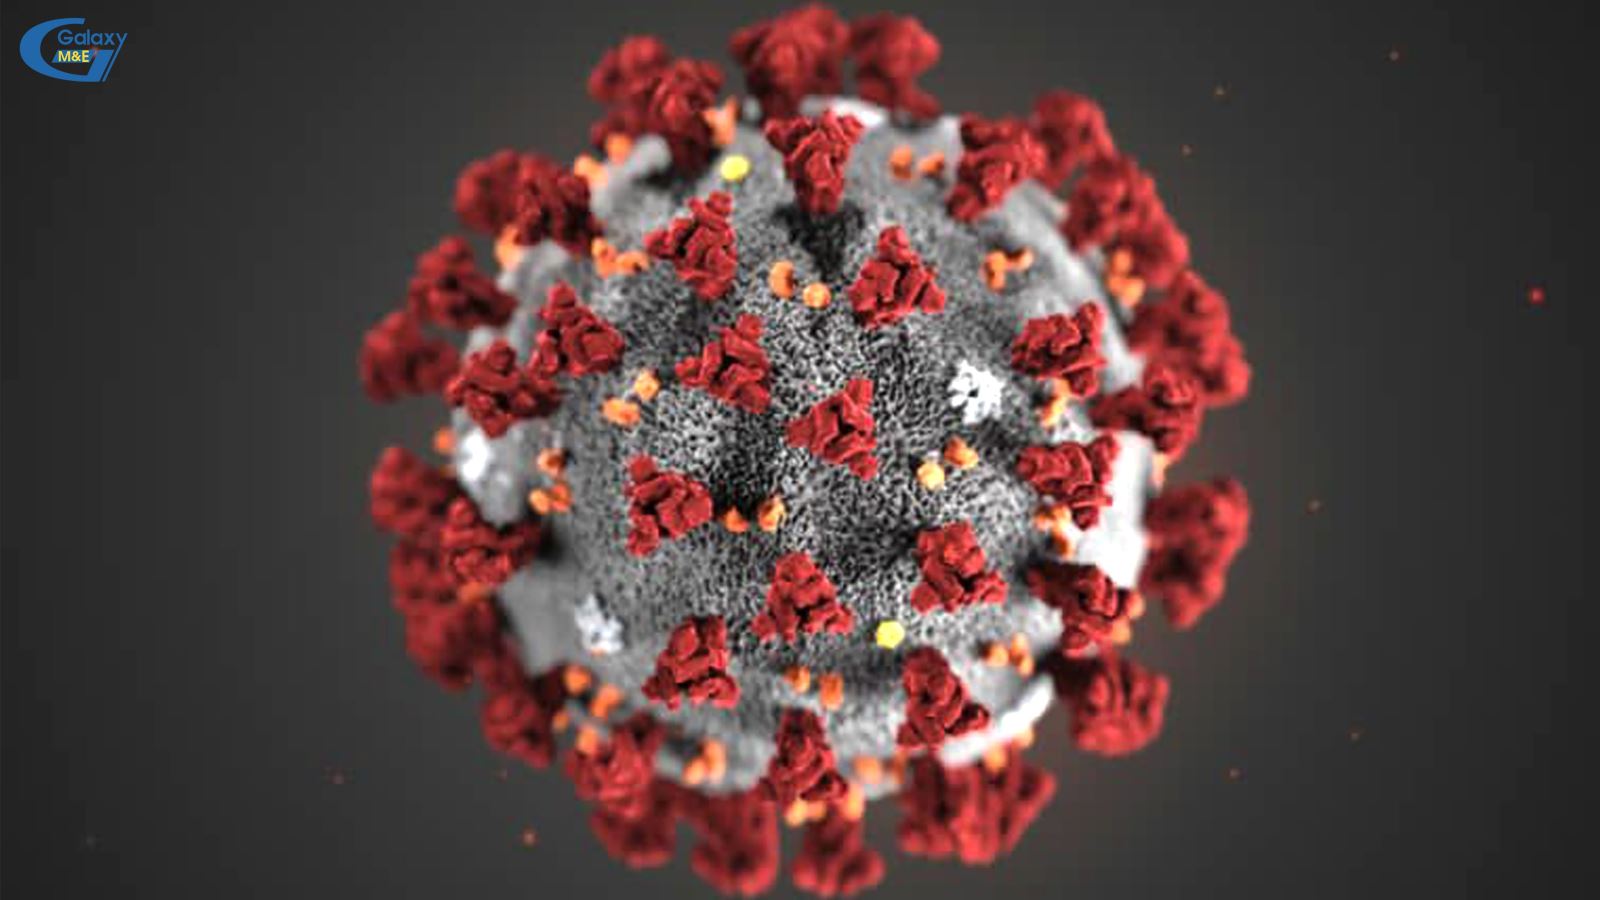 The new Corona virus has been labeled by the WHO as 2019-nCoV. Coronavirus usually causes the symptoms of a common cold, infection of the nose, sinuses or sore throat and spreads through sneezing and coughing. However, it can lead to acute and fatal pneumoni